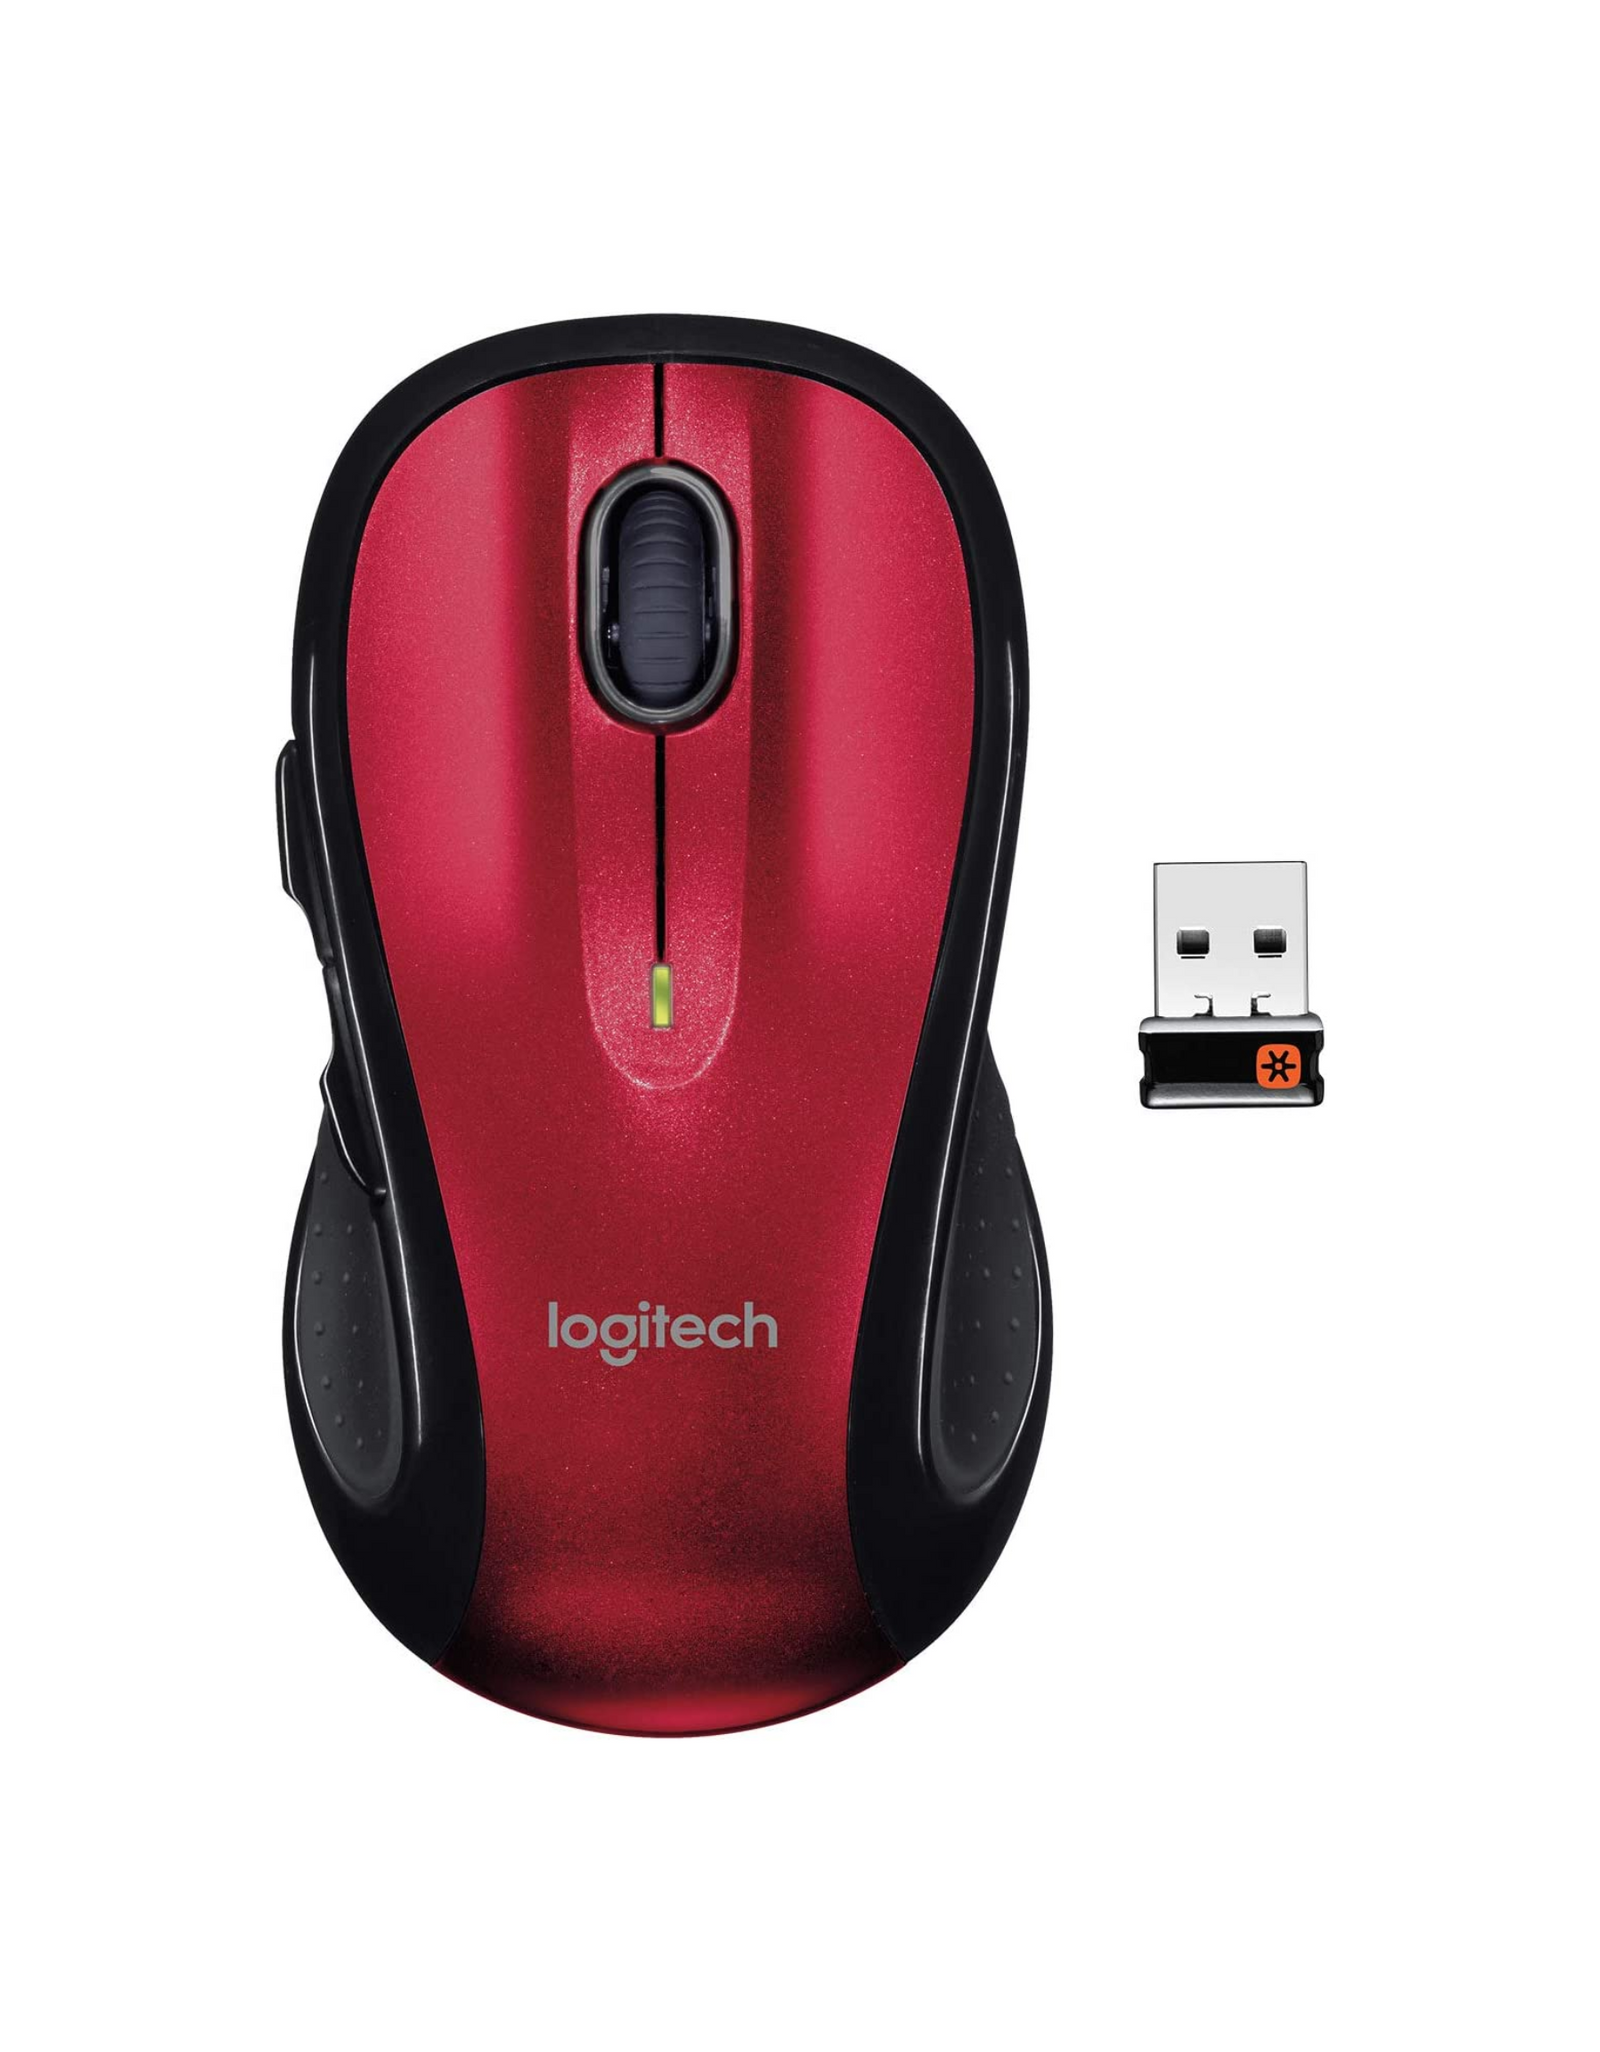 Logitech M510 Wireless Computer Mouse with USB Receiver, Red